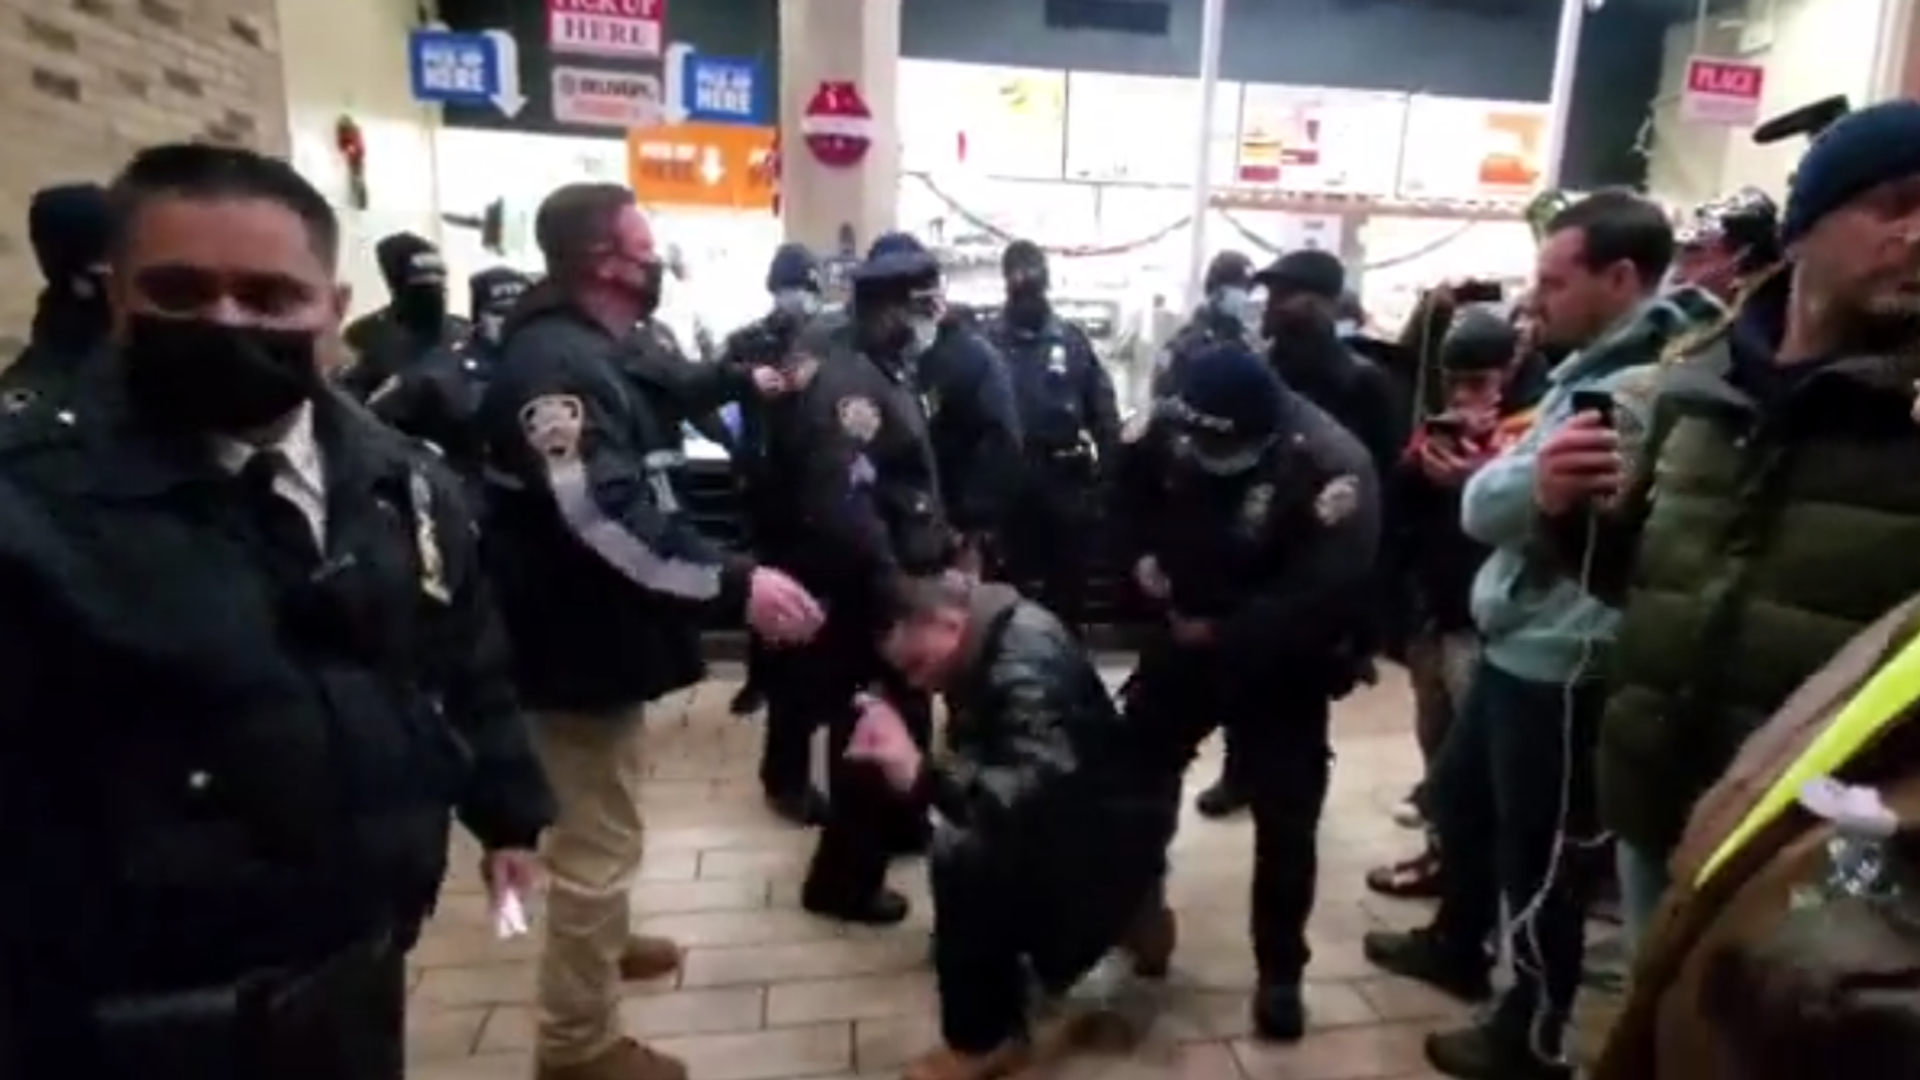 Screenshot from a video allegedly showing NYPD officers arresting anti-vaccination protesters in Burger King in Brooklyn - Sputnik International, 1920, 28.12.2021